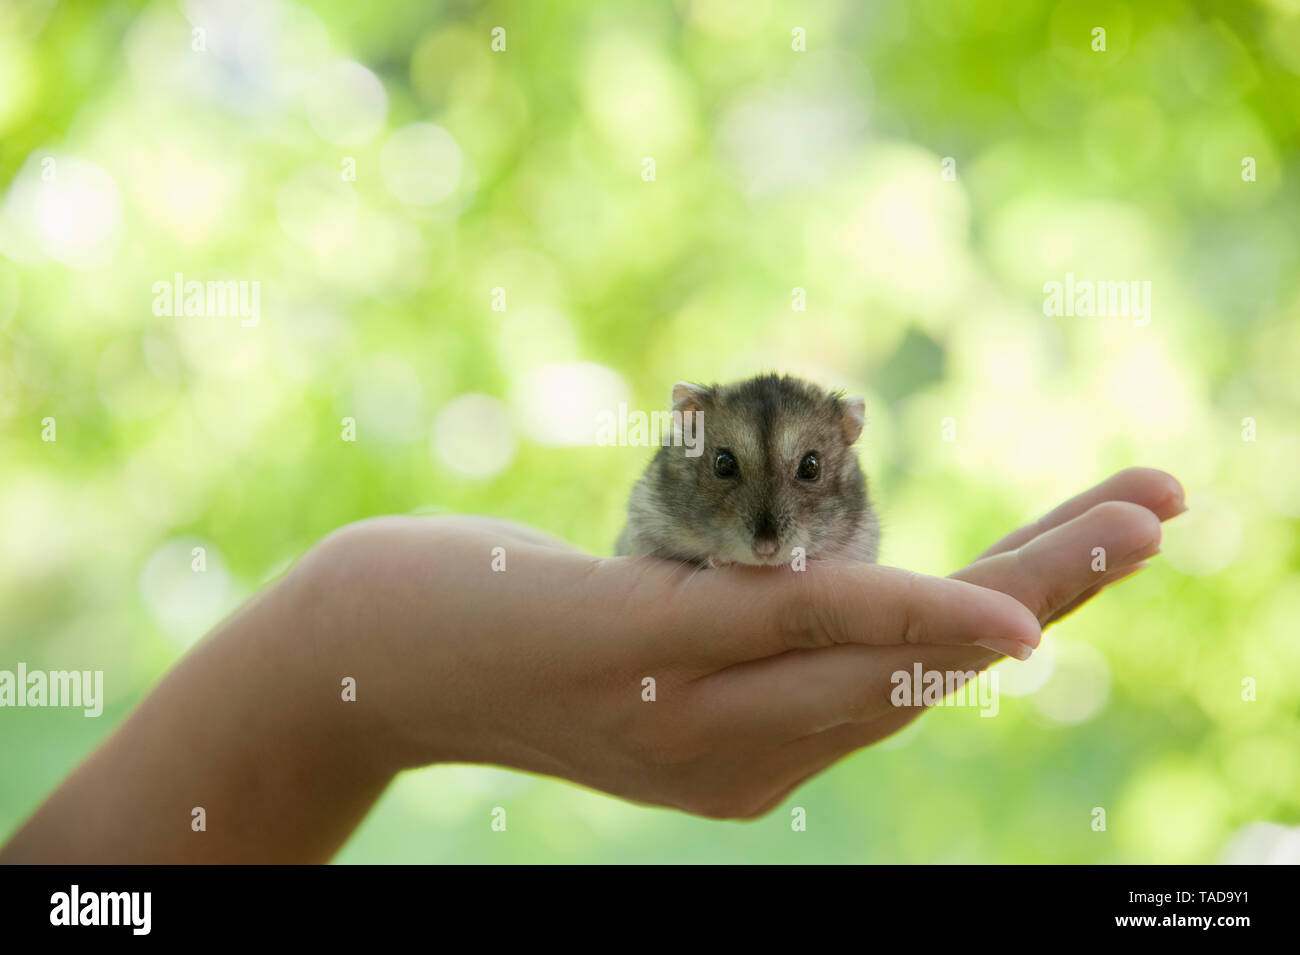 Portrait of hamster crouching in woman's cupped hand Stock Photo